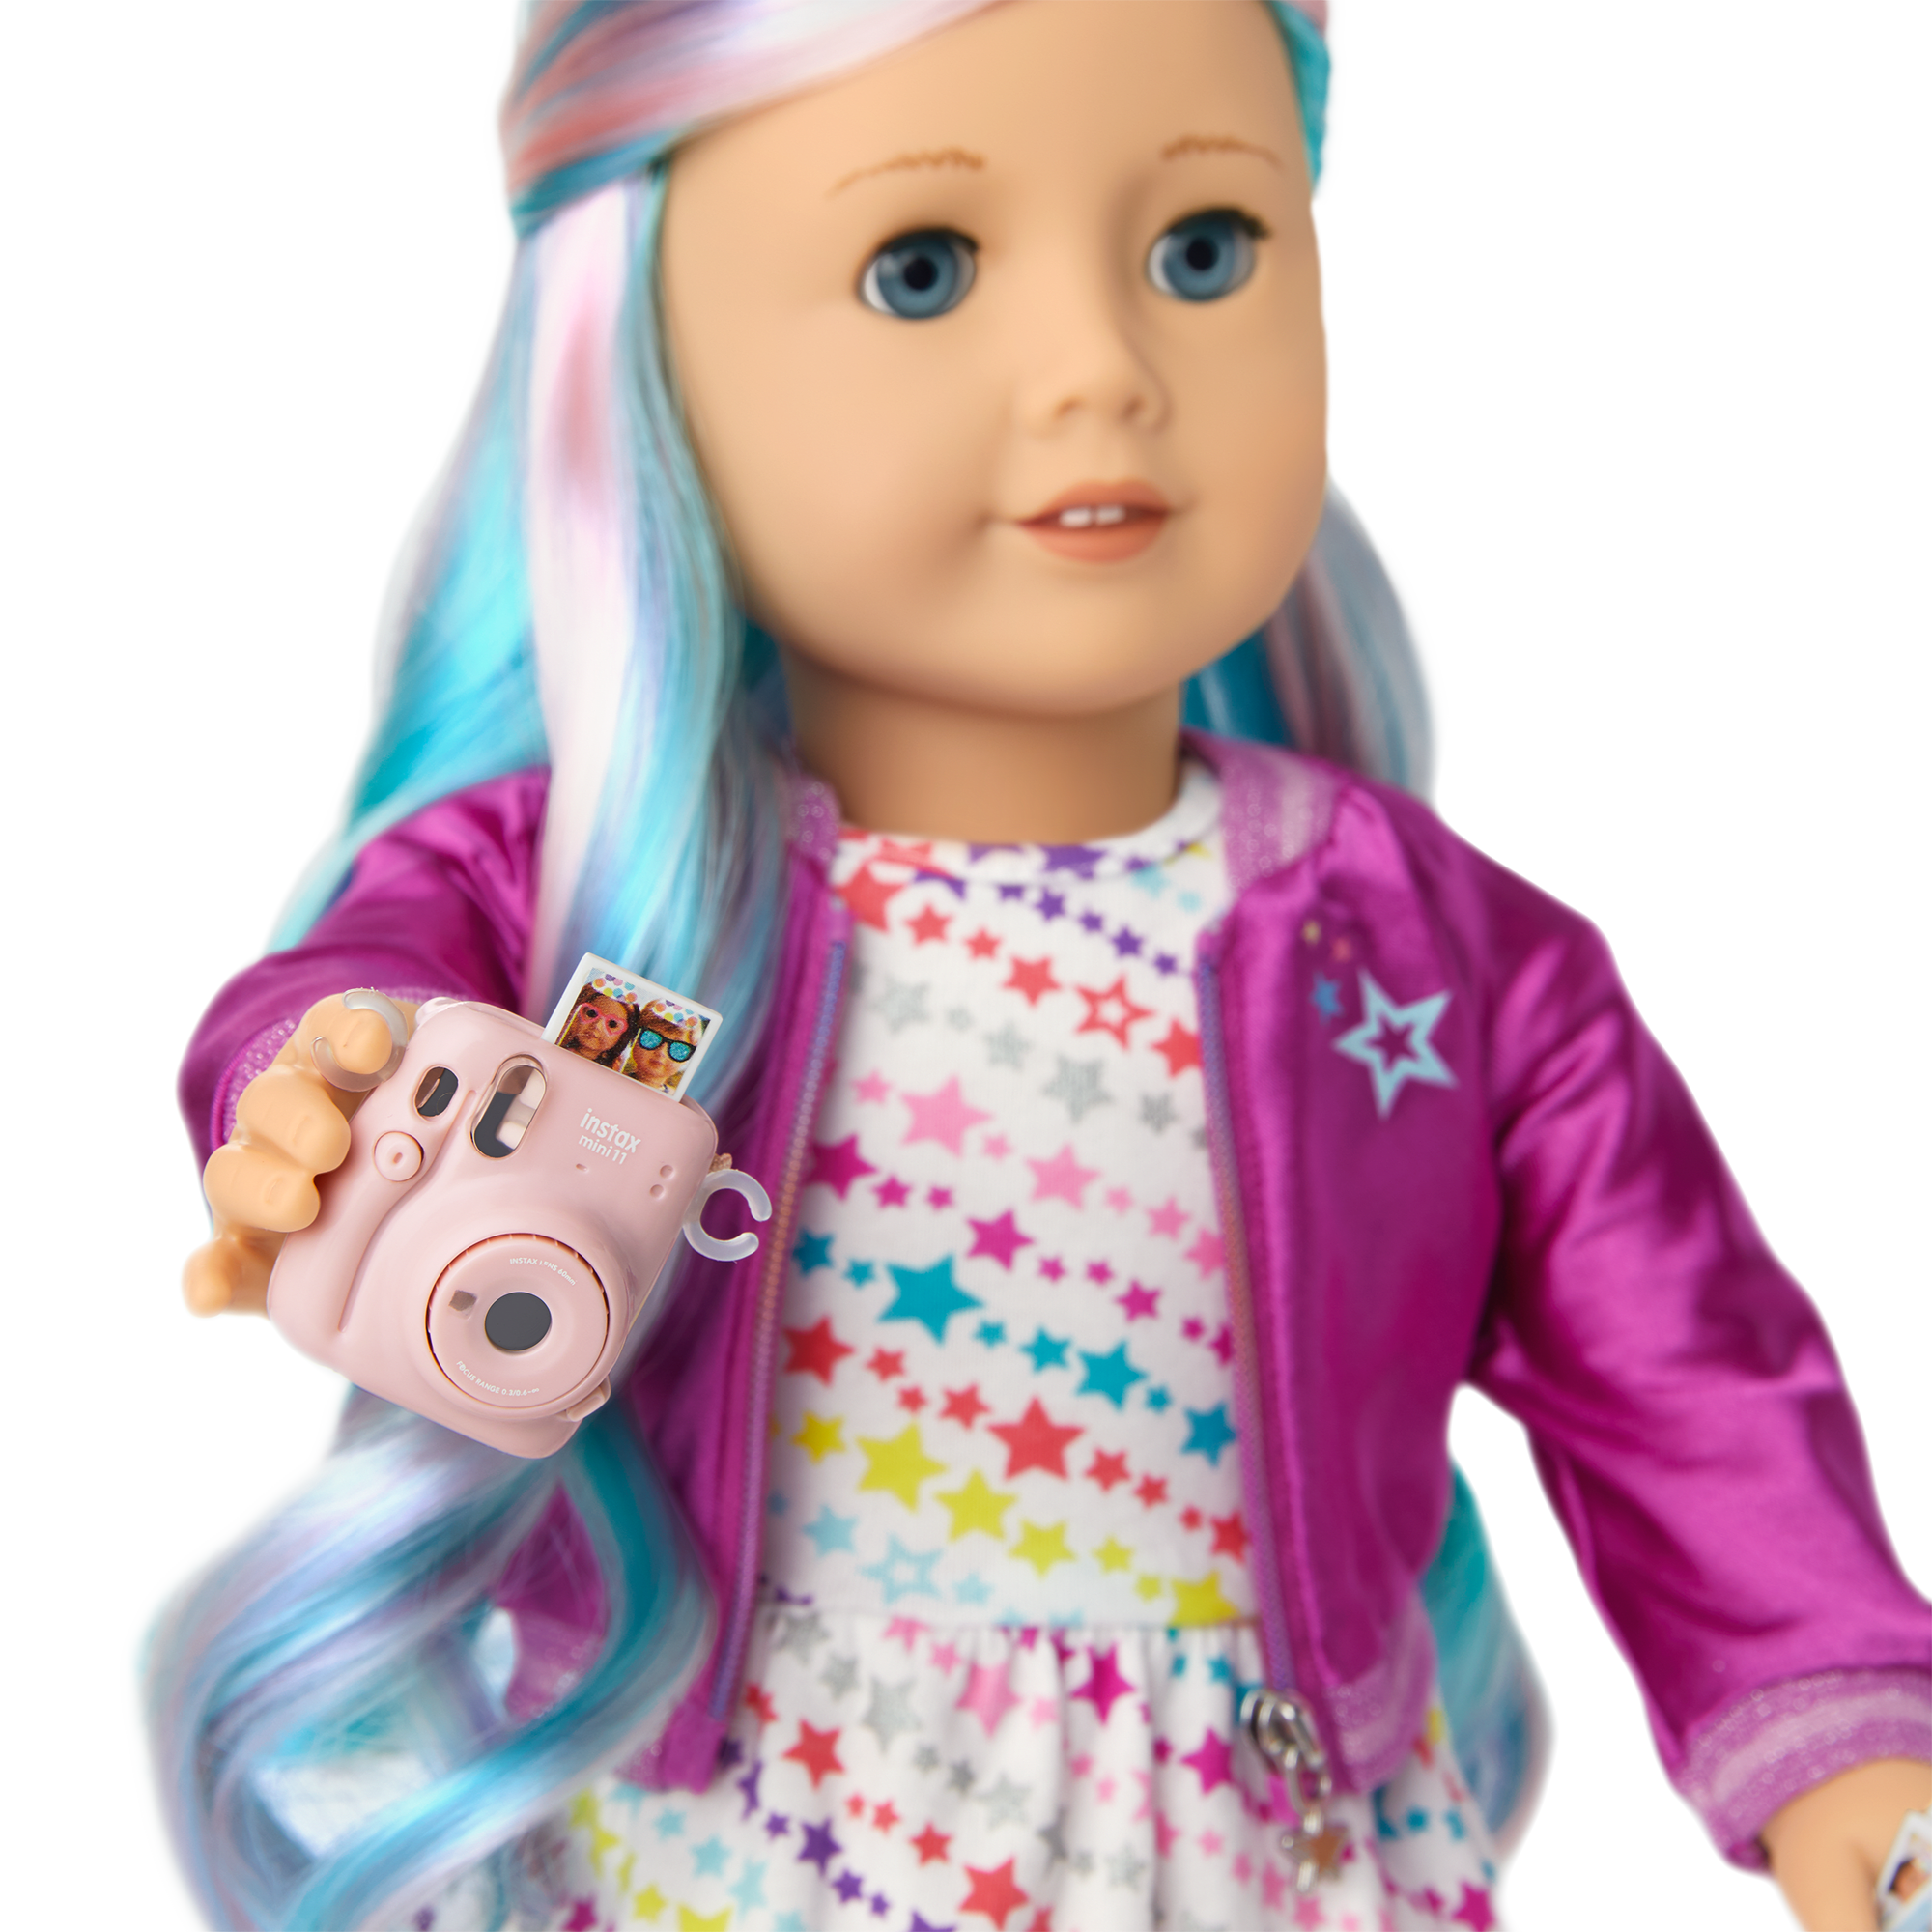 Find more American Girl Doll Brush for sale at up to 90% off